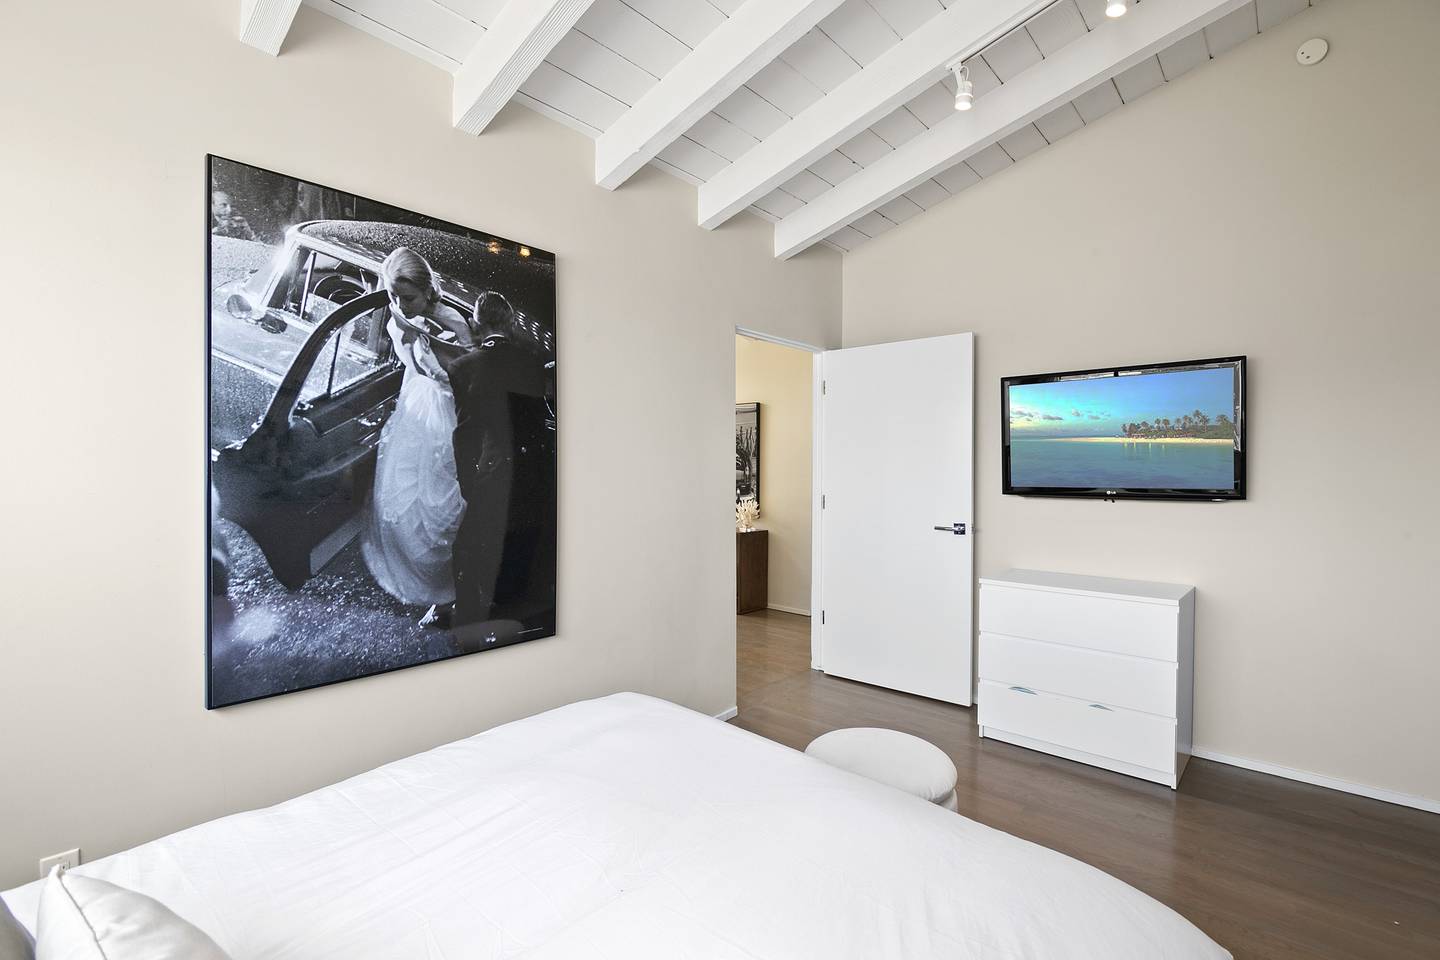 Catch up on your favorite shows with Smart TVs throughout the villa